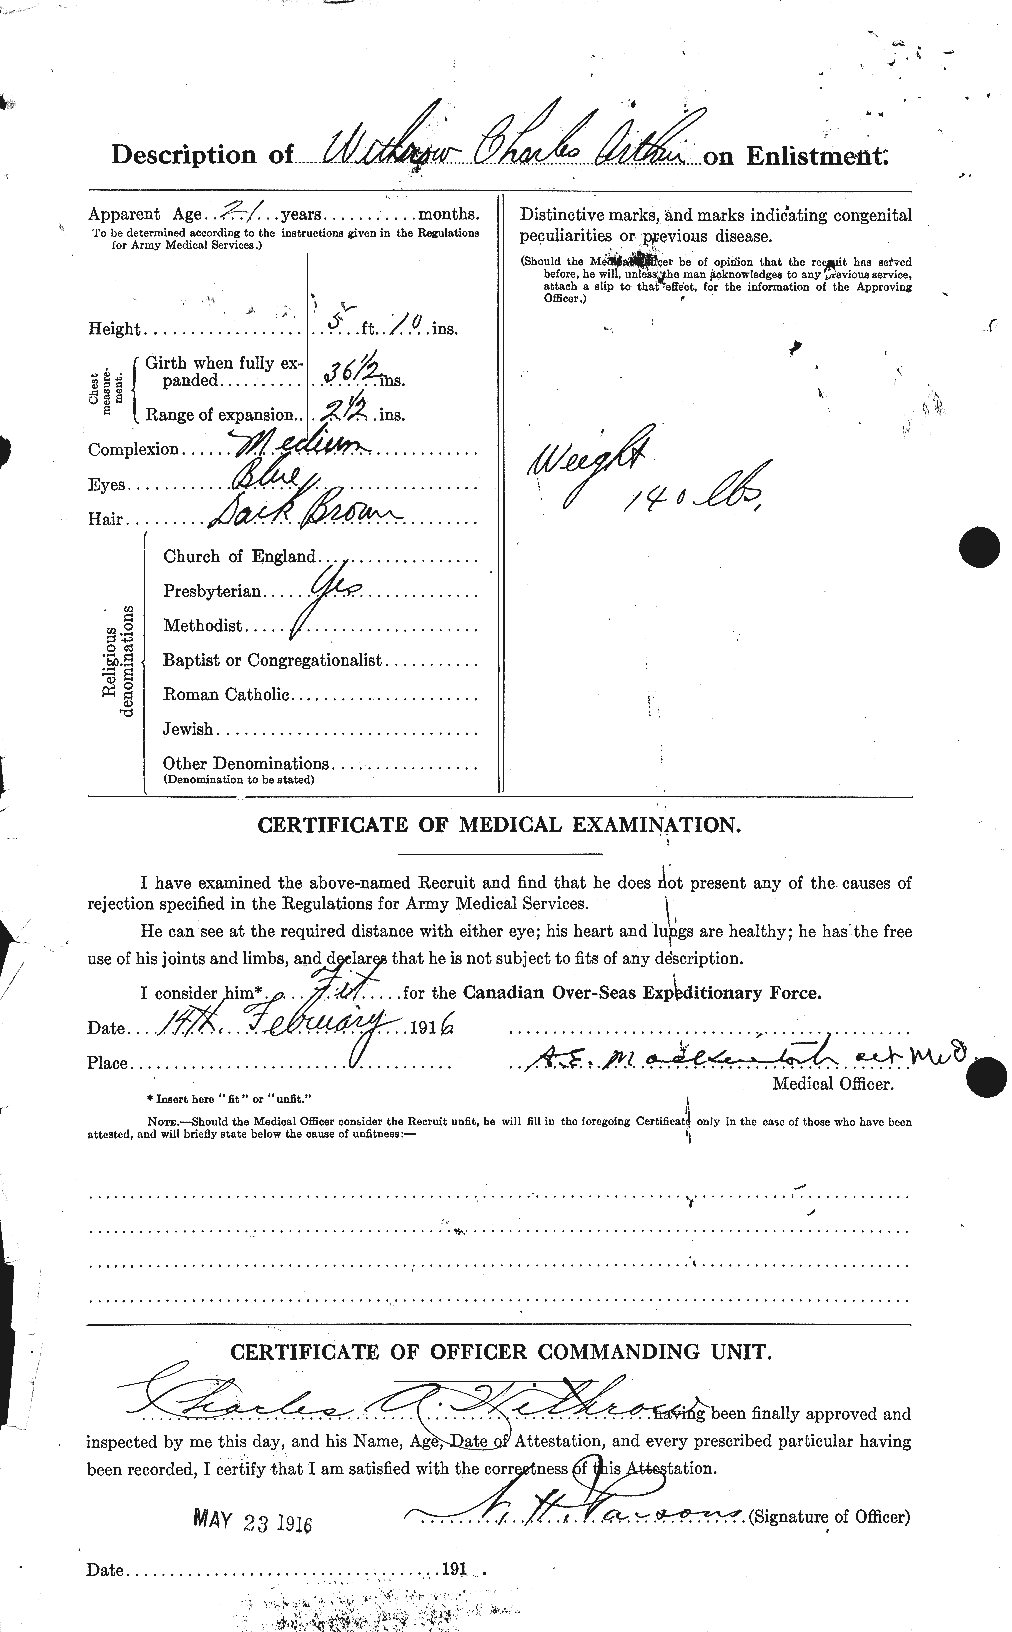 Personnel Records of the First World War - CEF 682087b